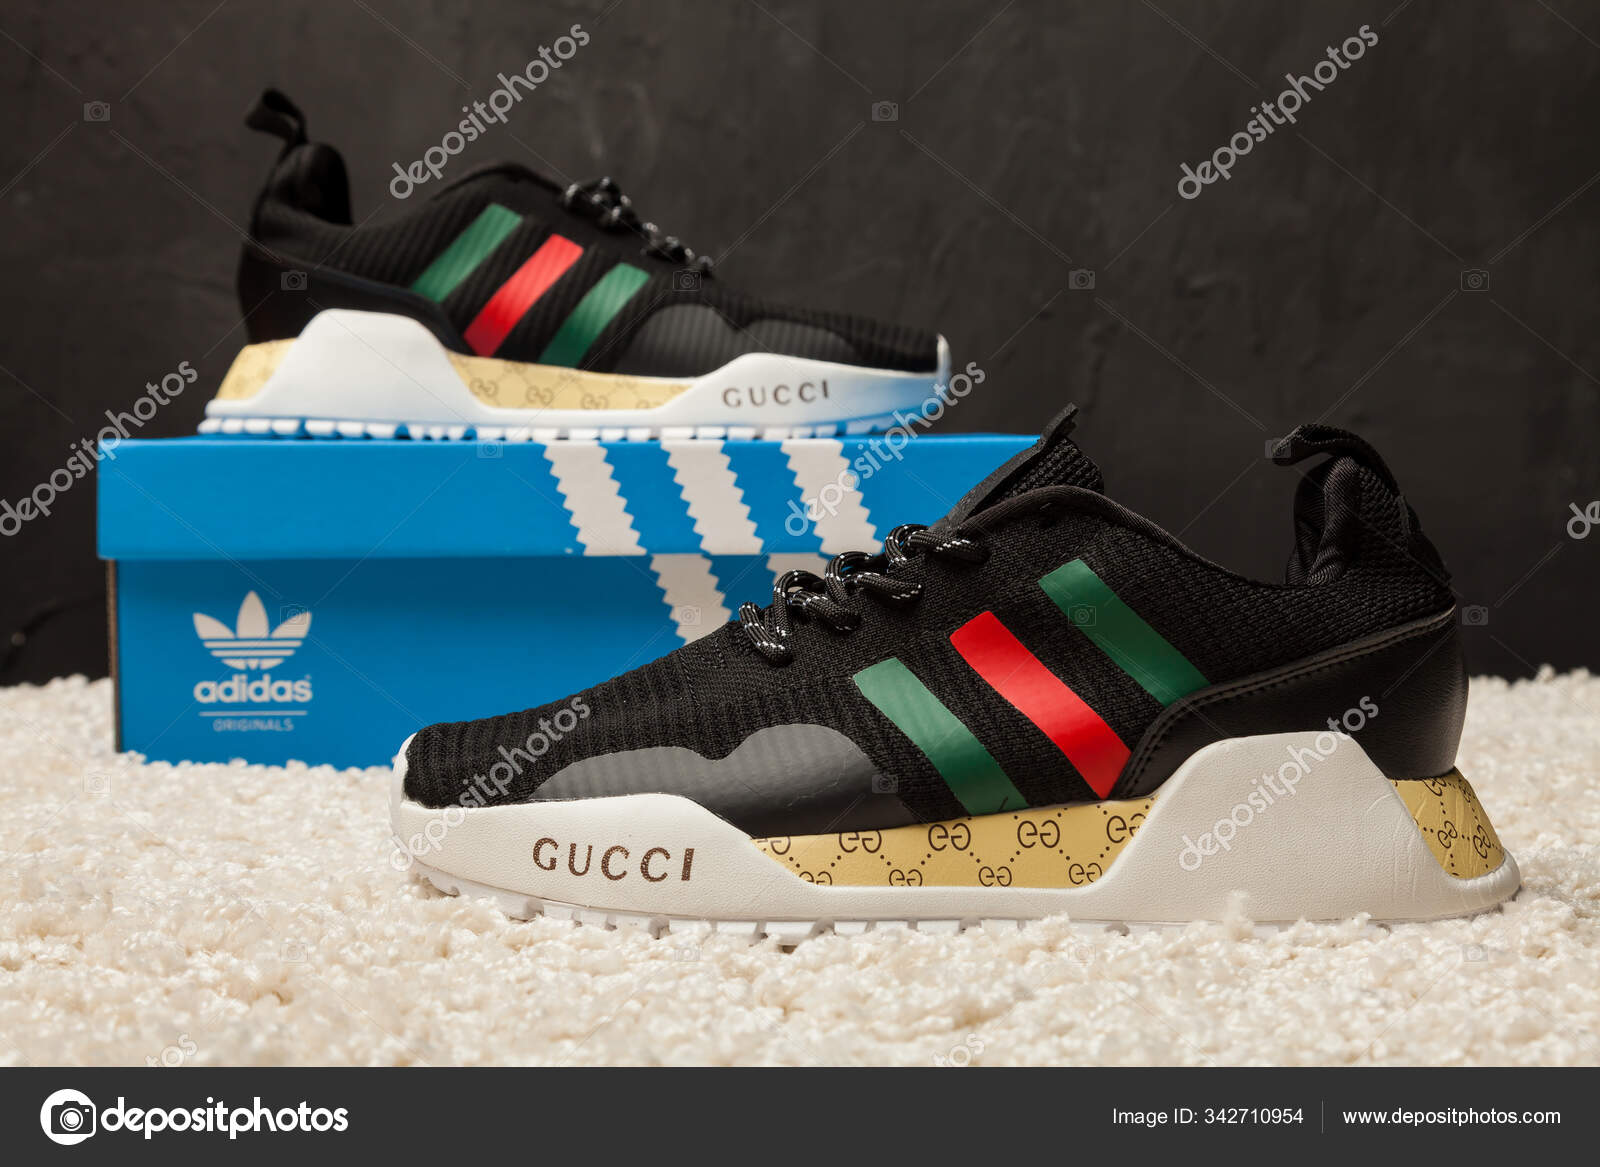 Gucci Run Sneaker ‎725612 -  https://www.zealreps.pl/index.php?main_page=search_result&search_in_description=1&keyword= Gucci+Run+Sneaker+725612 : r/zealreplica